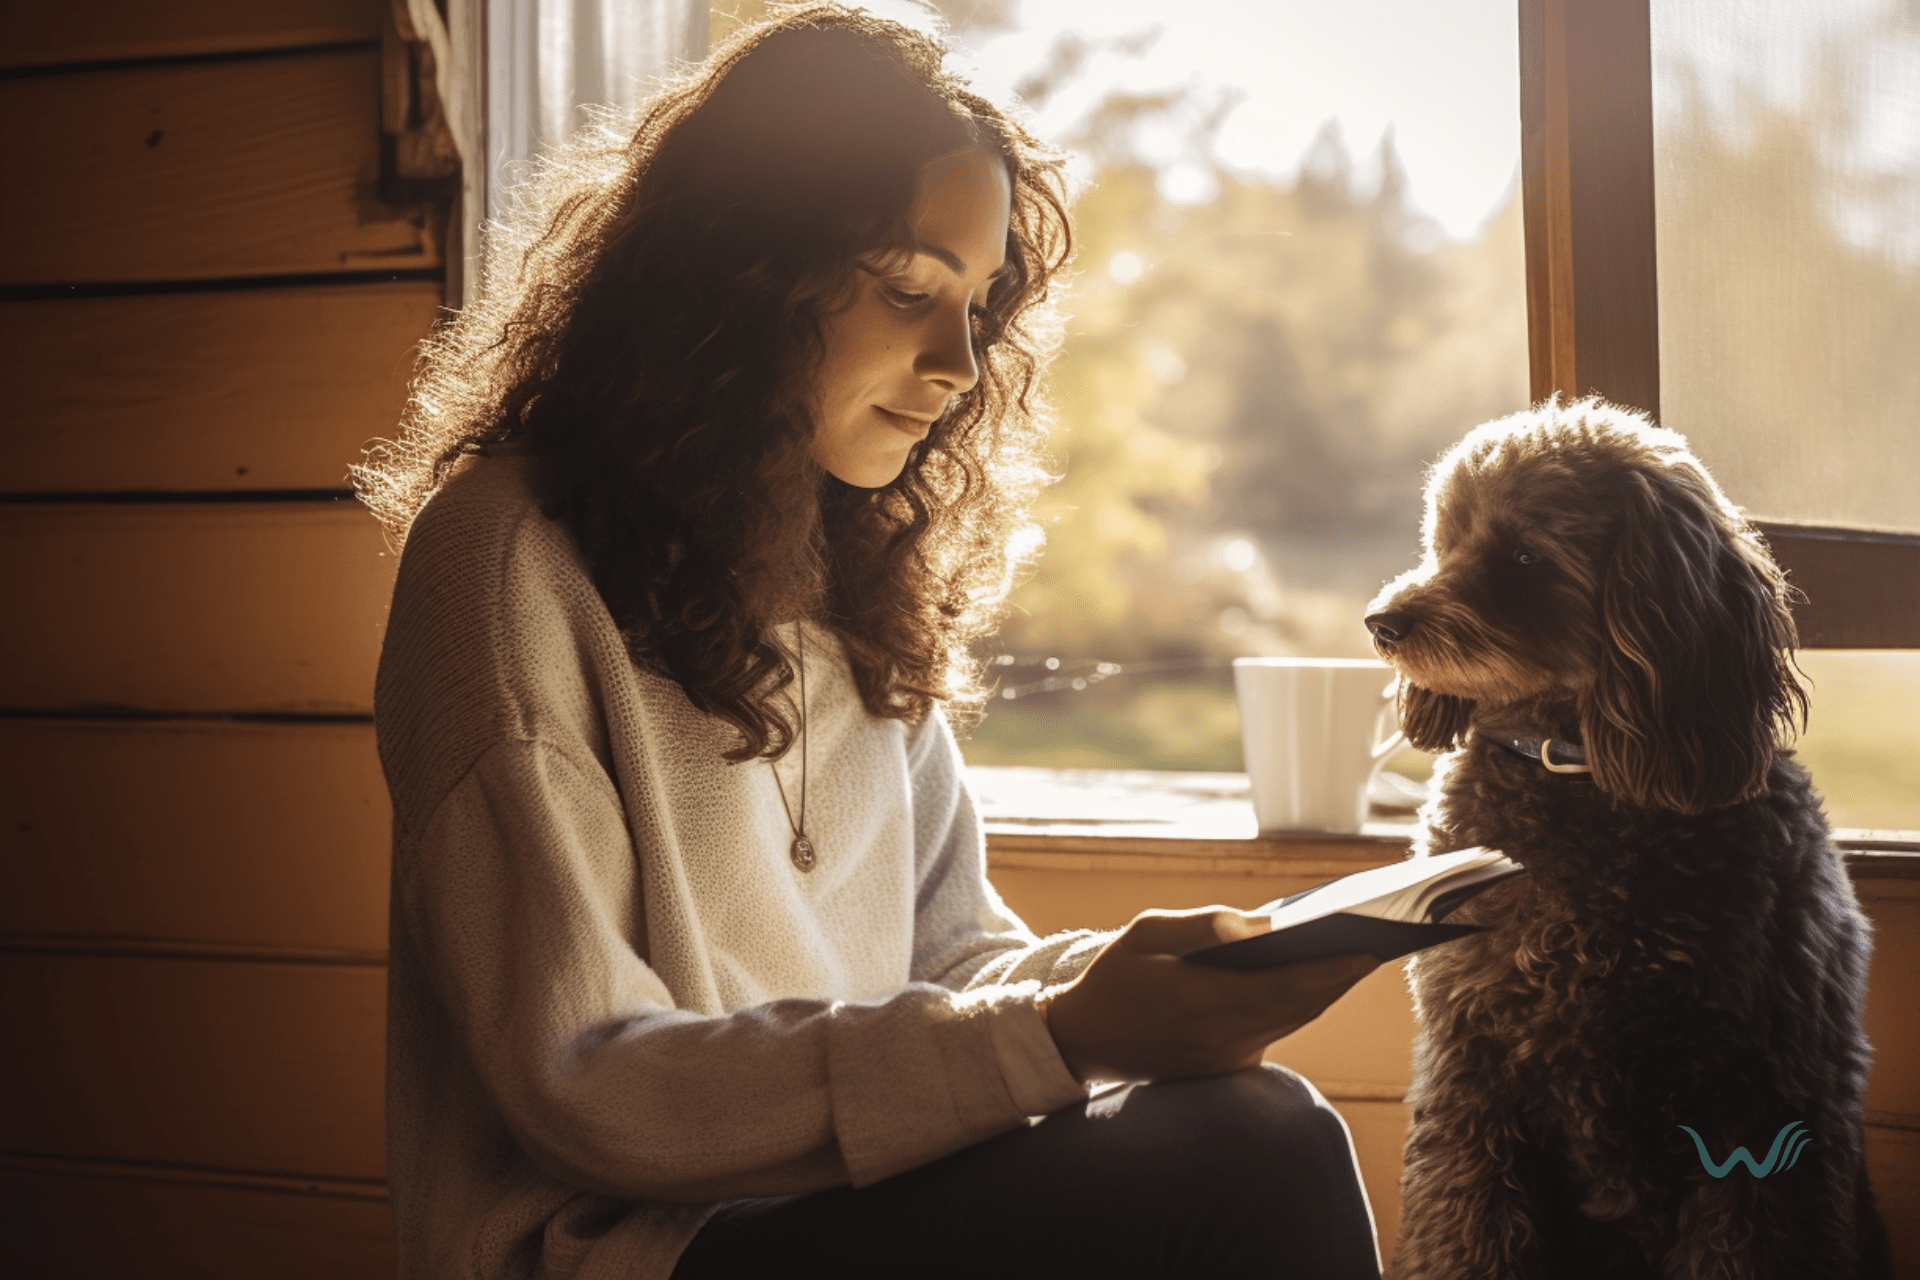 steps to qualify for housing with an emotional support animal